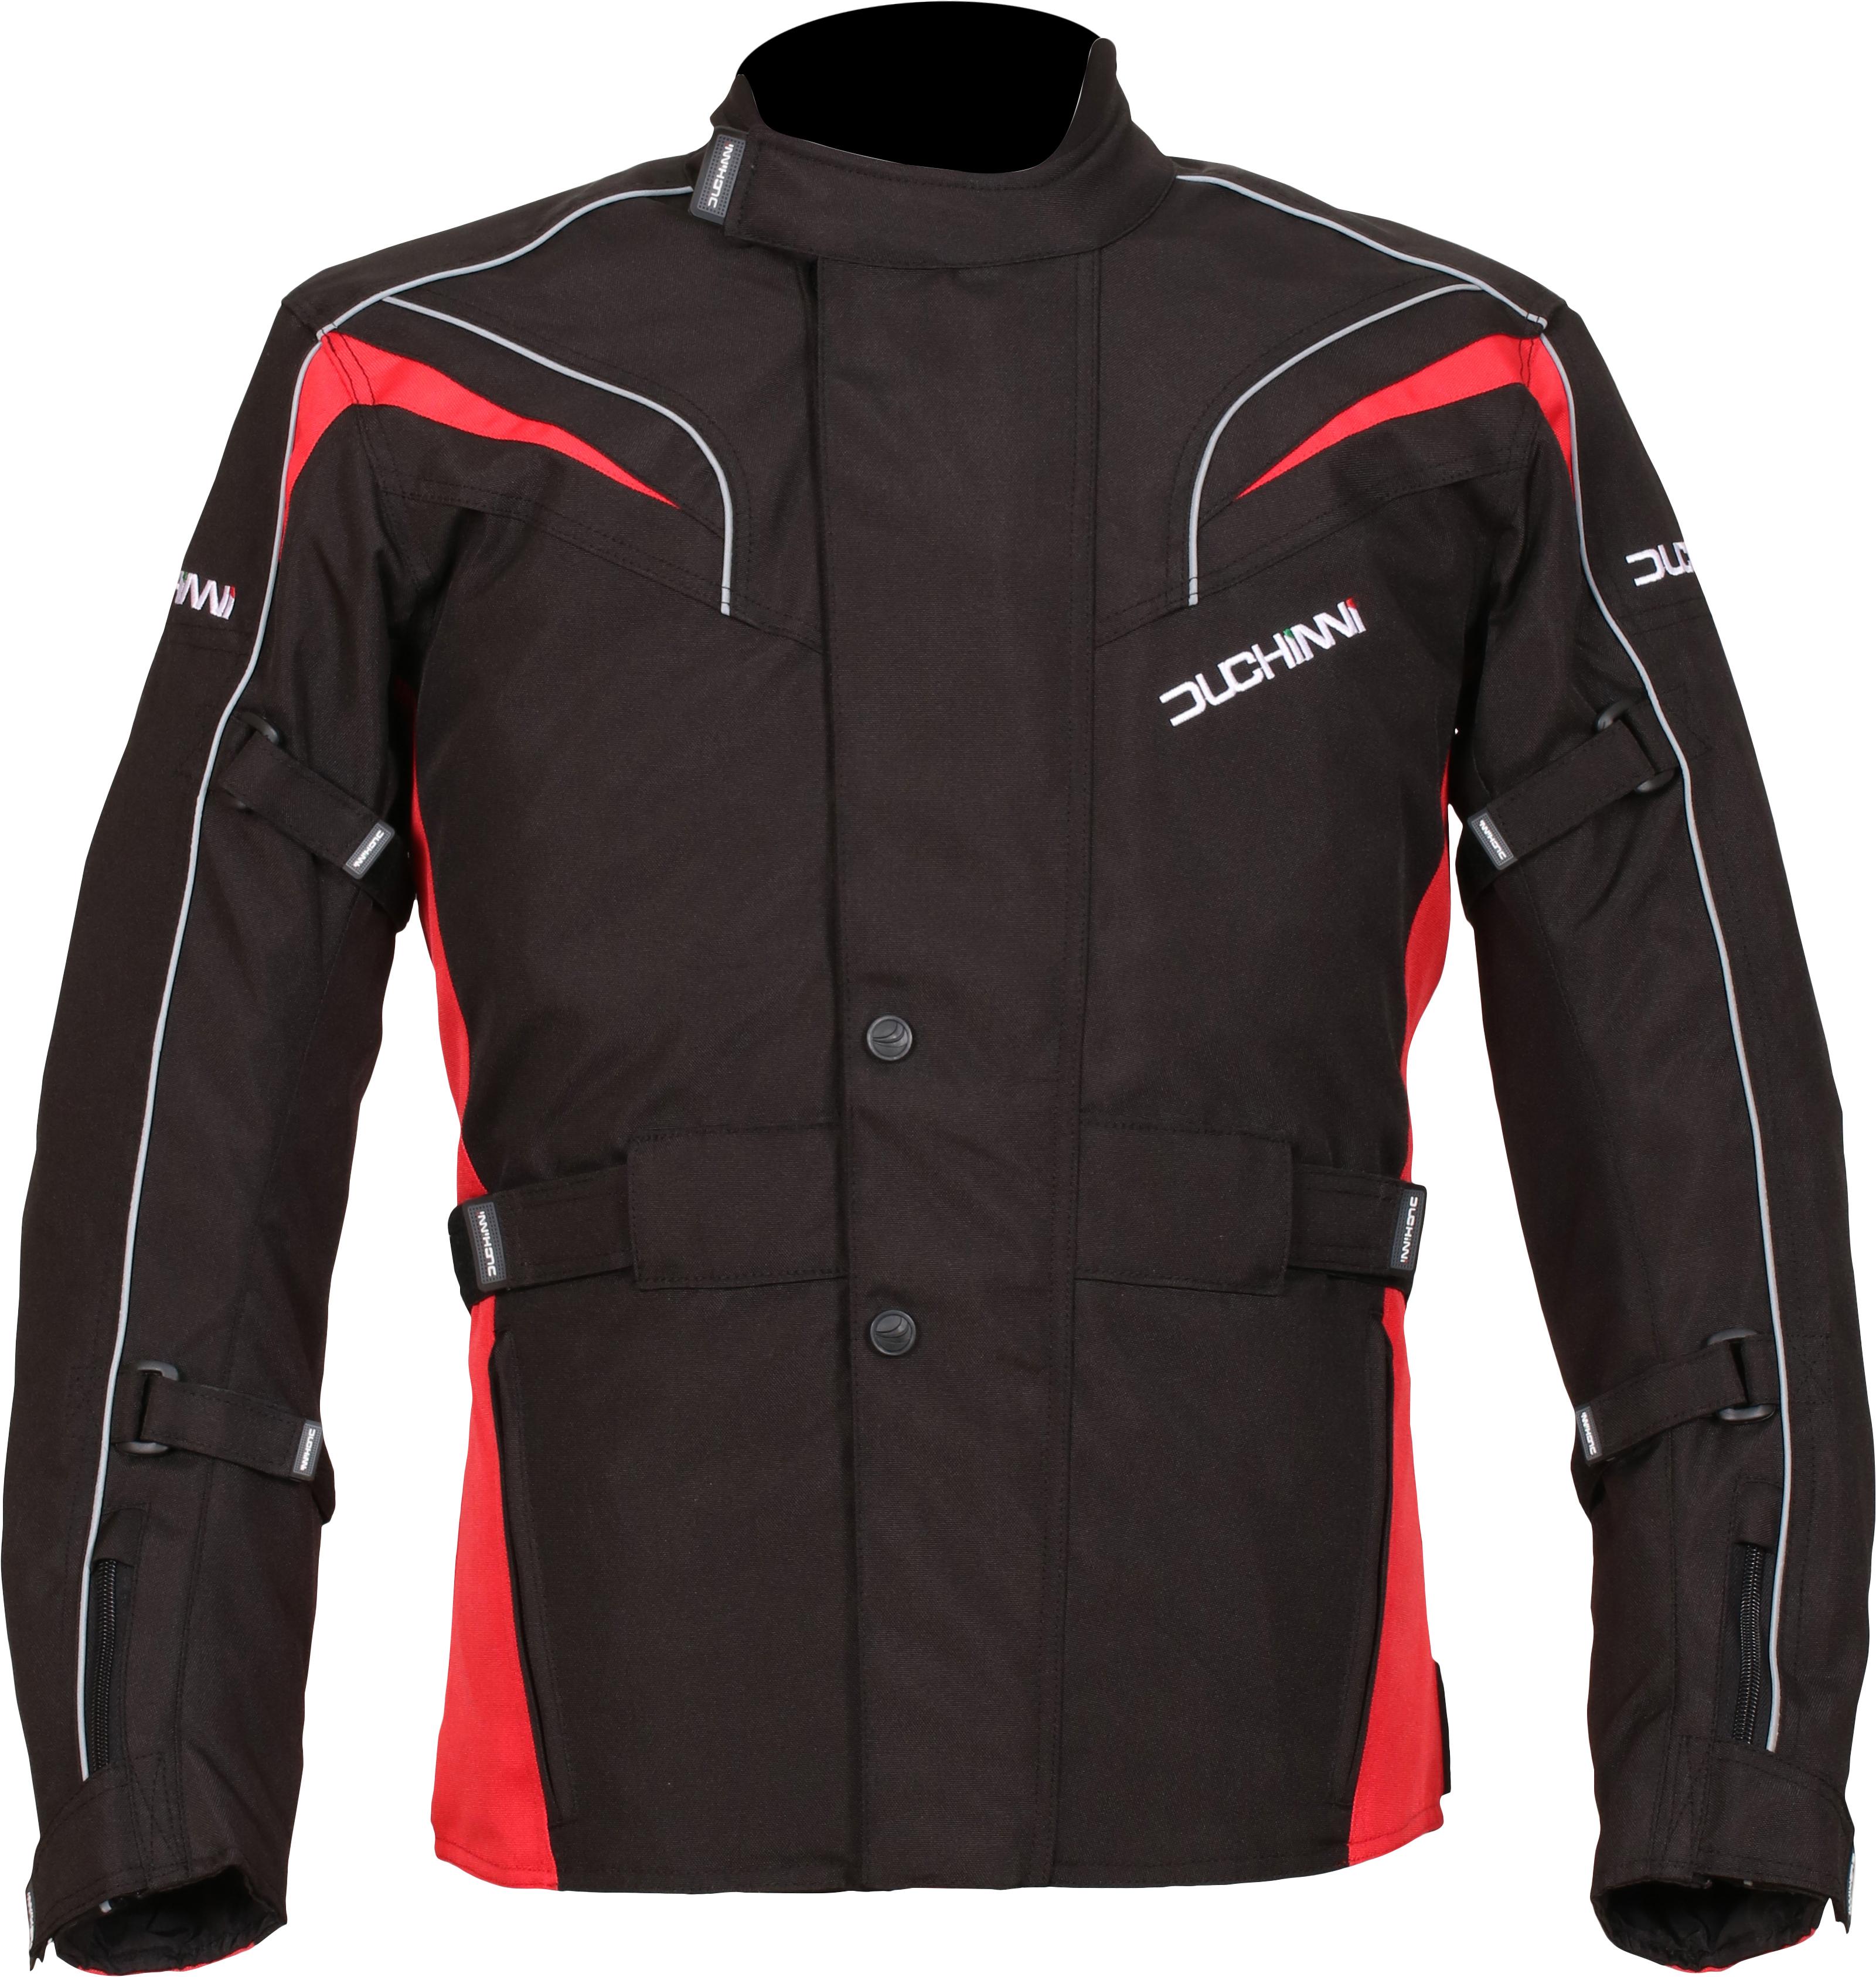 Duchinni Hurrican Motorcycle Jacket - Black And Red, 2Xl